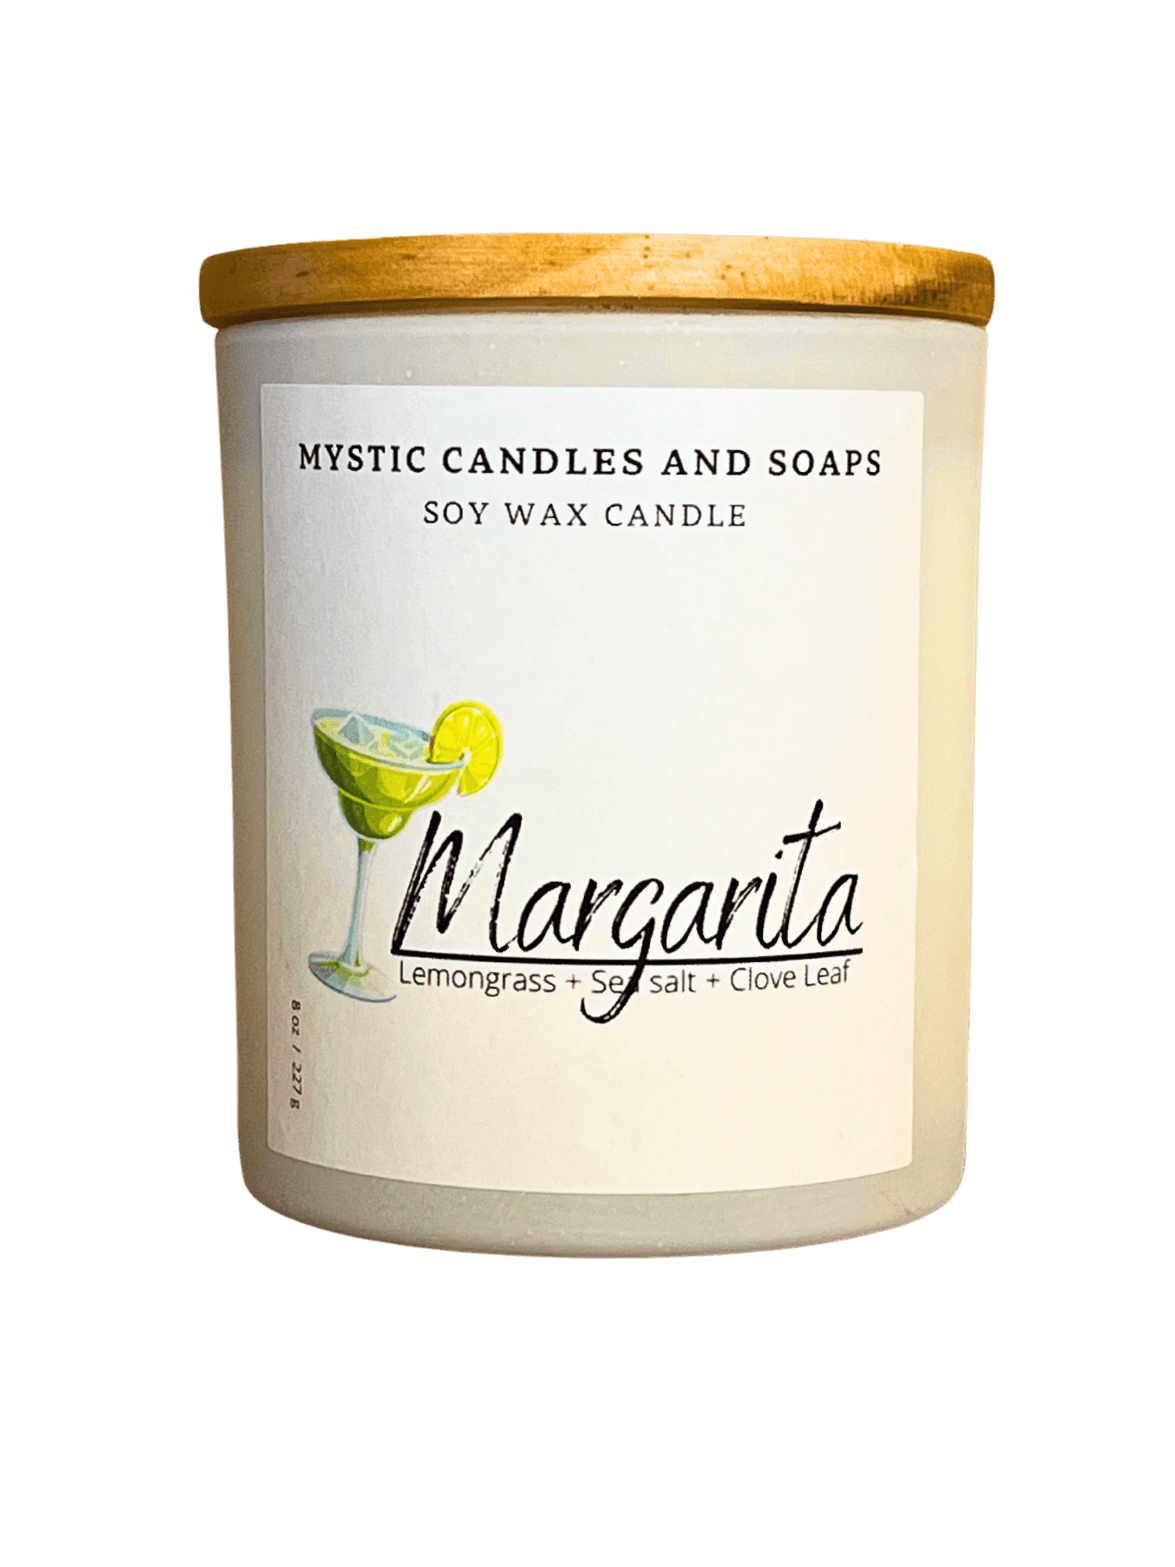 Margarita Candle - Mystic Candles and Soaps LLC